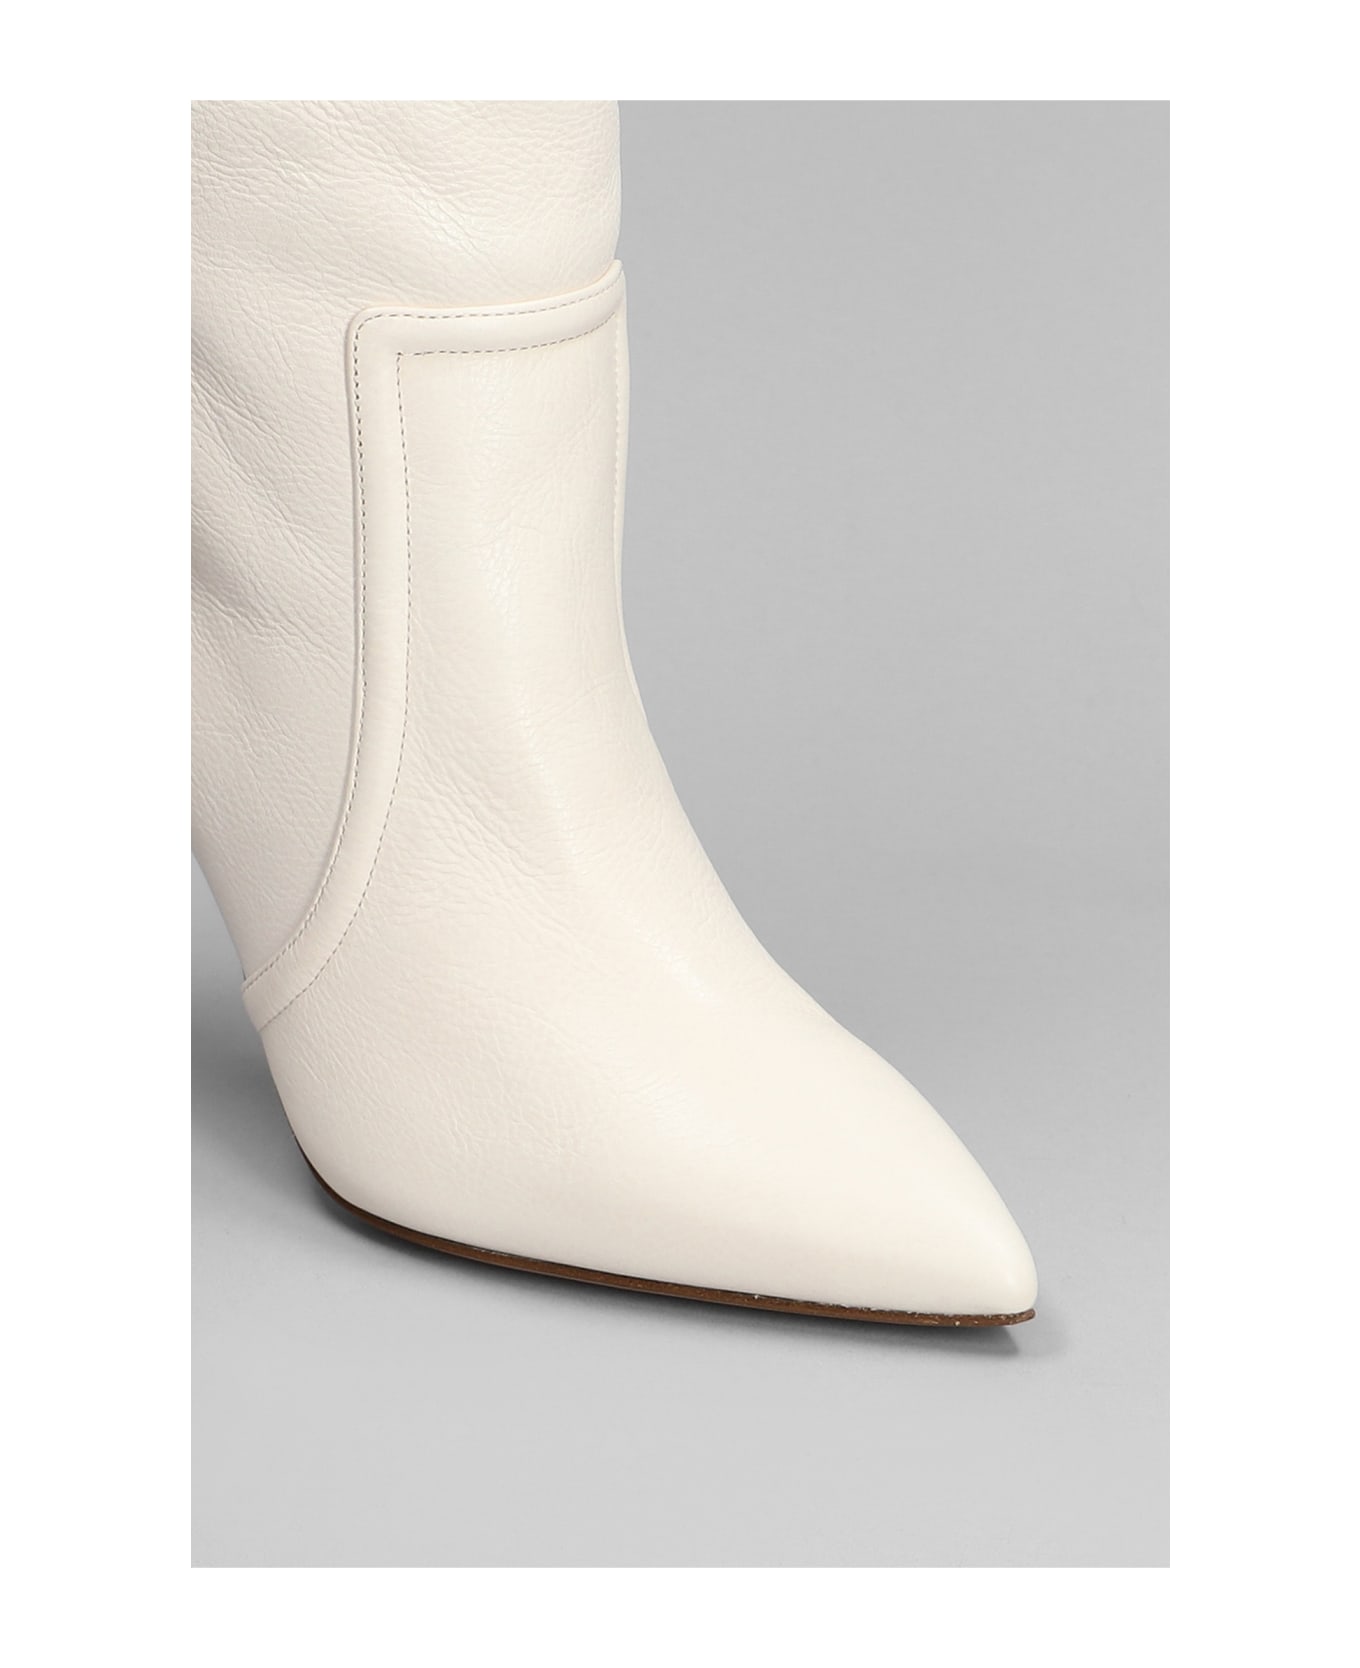 Paris Texas High Heels Boots In White Leather - white